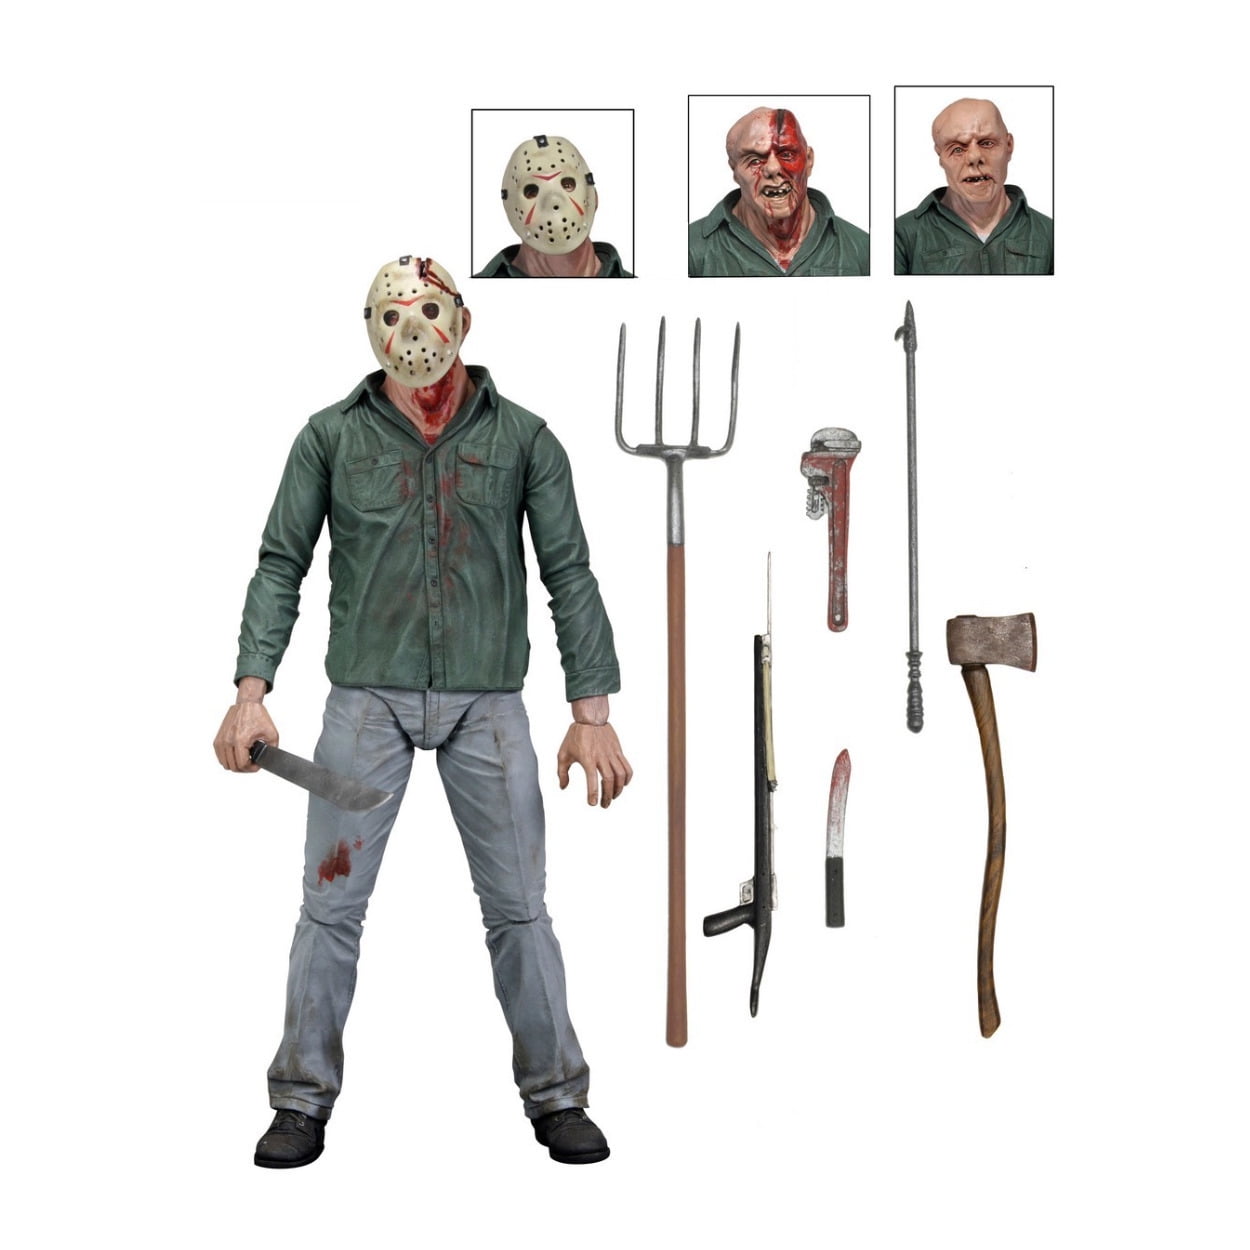 JASON VOORHEES Friday the 13th Part 4 18 inch 1/4 Scale Action Figure Neca 2018